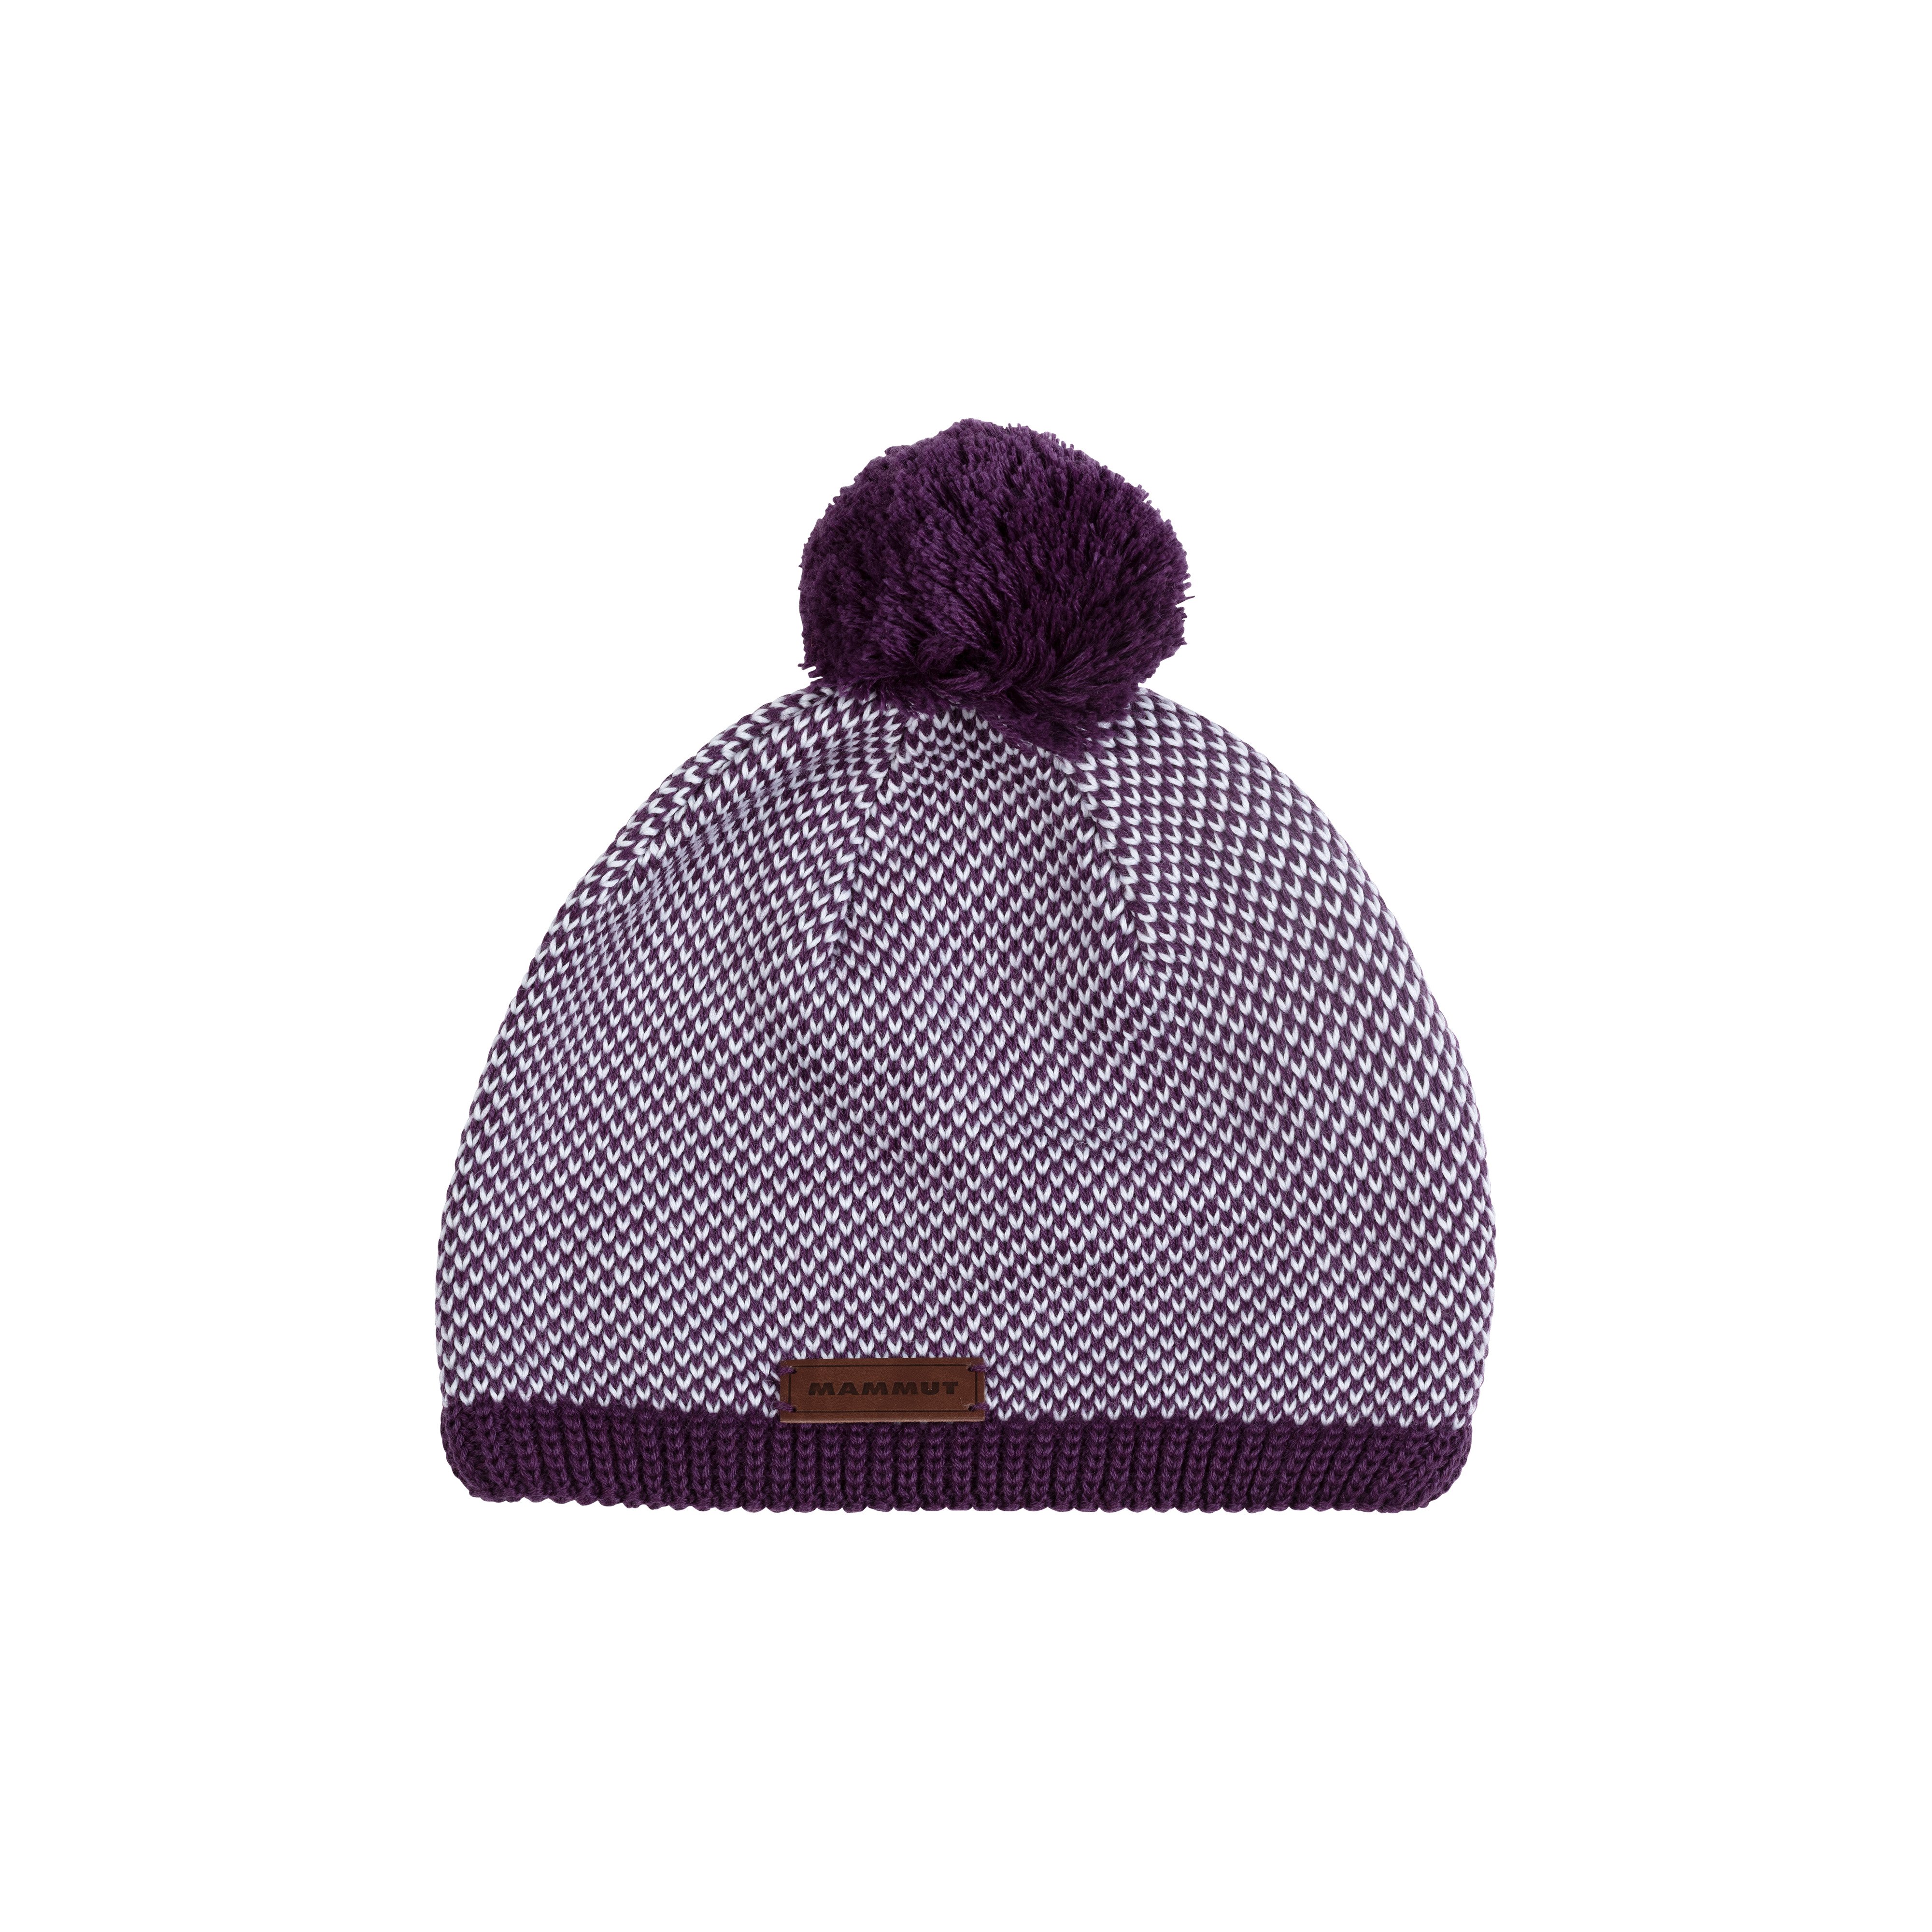 Snow Beanie - grape-white, one size product image